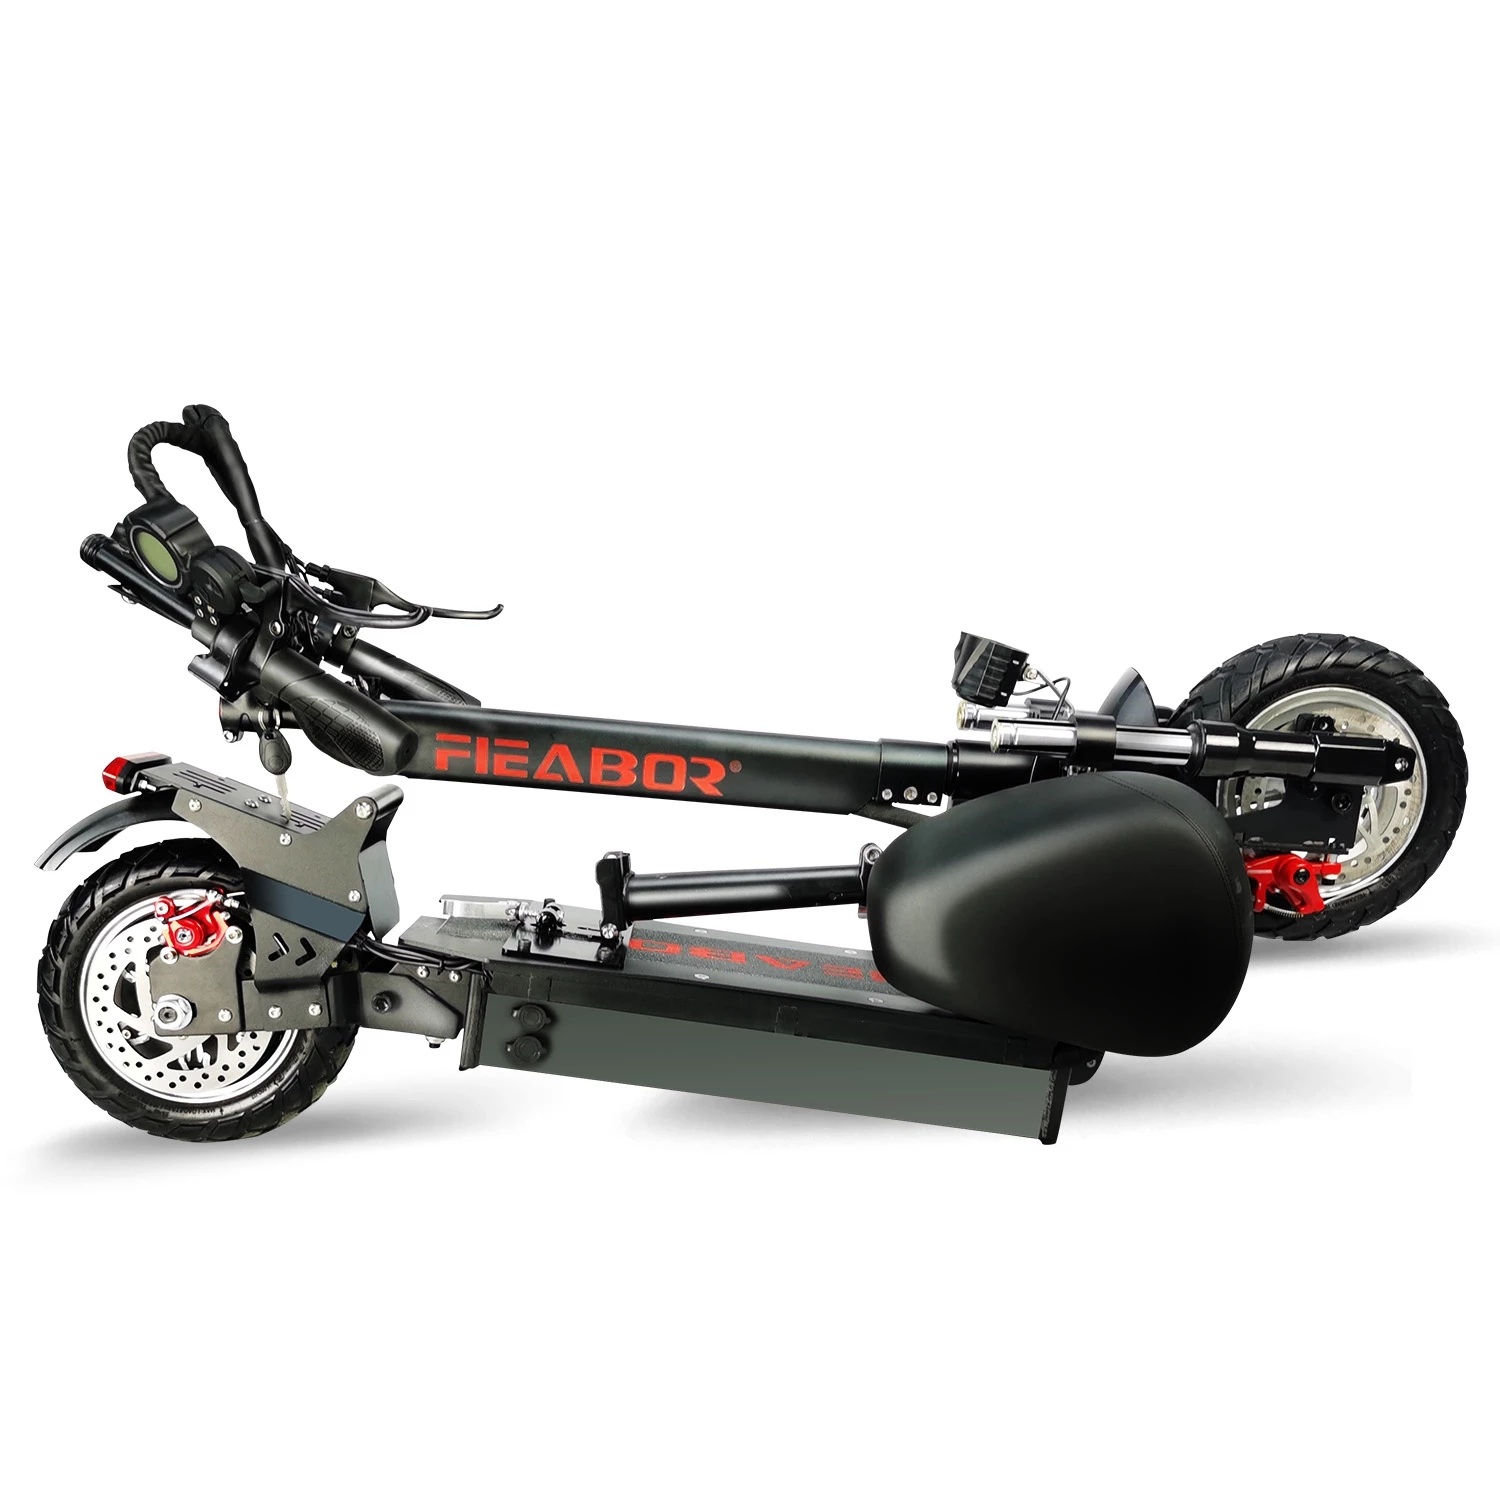 Find EU DIRECT FIEABOR Q08P Oil Brake 2400W 60V 27Ah Dual Motor 10 5 Inch Electric Scooter 200Kg Max Load 60 80Km Range for Sale on Gipsybee.com with cryptocurrencies